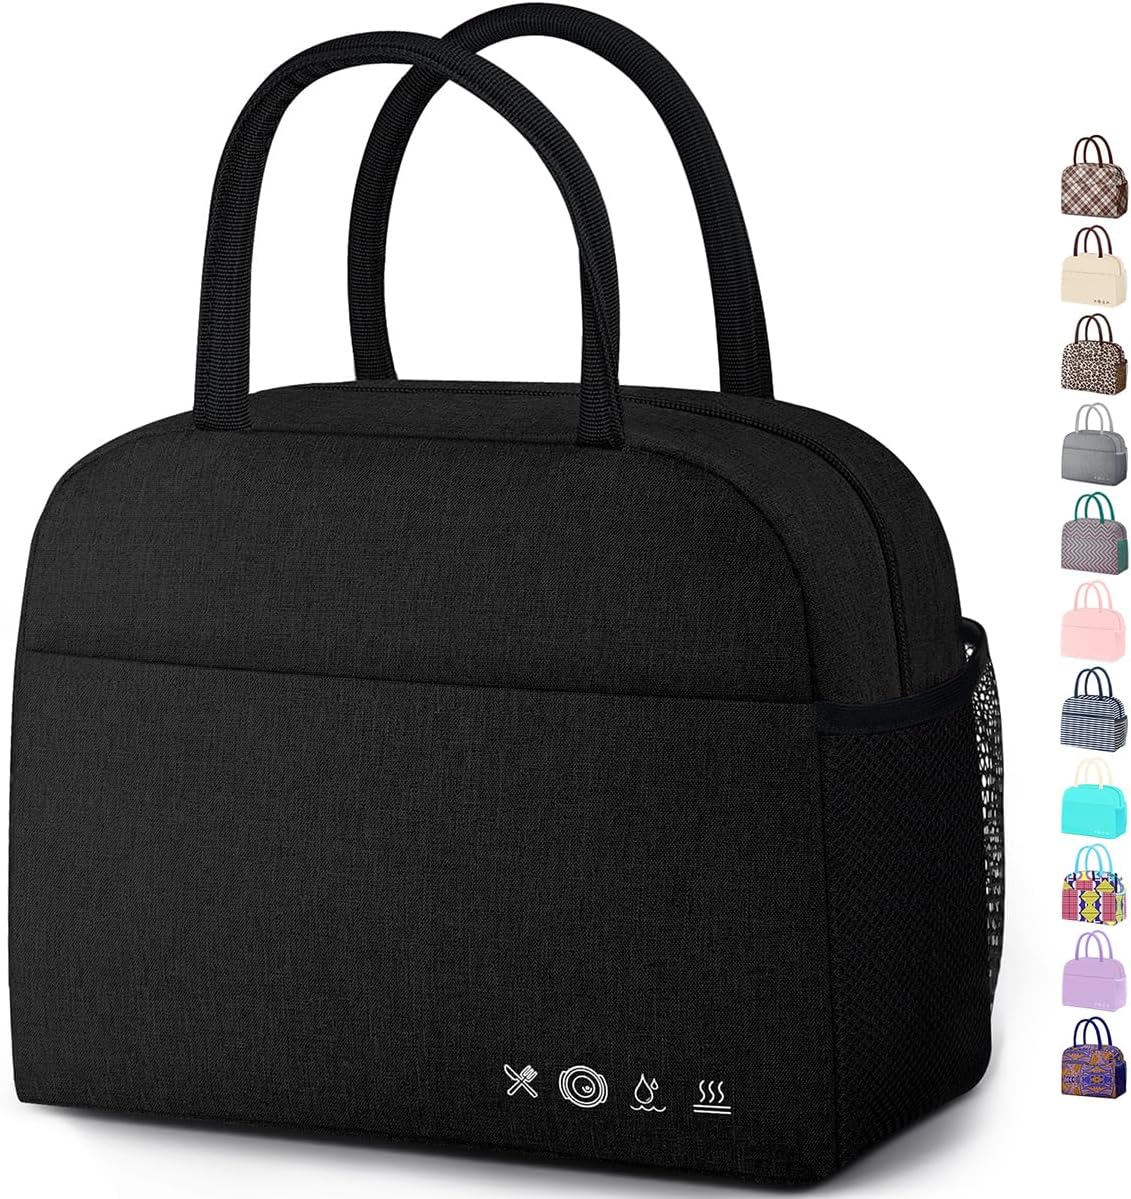  OCKLILY Lunch Box for Men, 17L Insulated Cooler Lunch Bag Women  Expandable Double Deck Lunch Cooler Bag,Lightweight Leakproof Lunch Tote Bag,  Suit For Work Travel Picnic (Black): Home & Kitchen